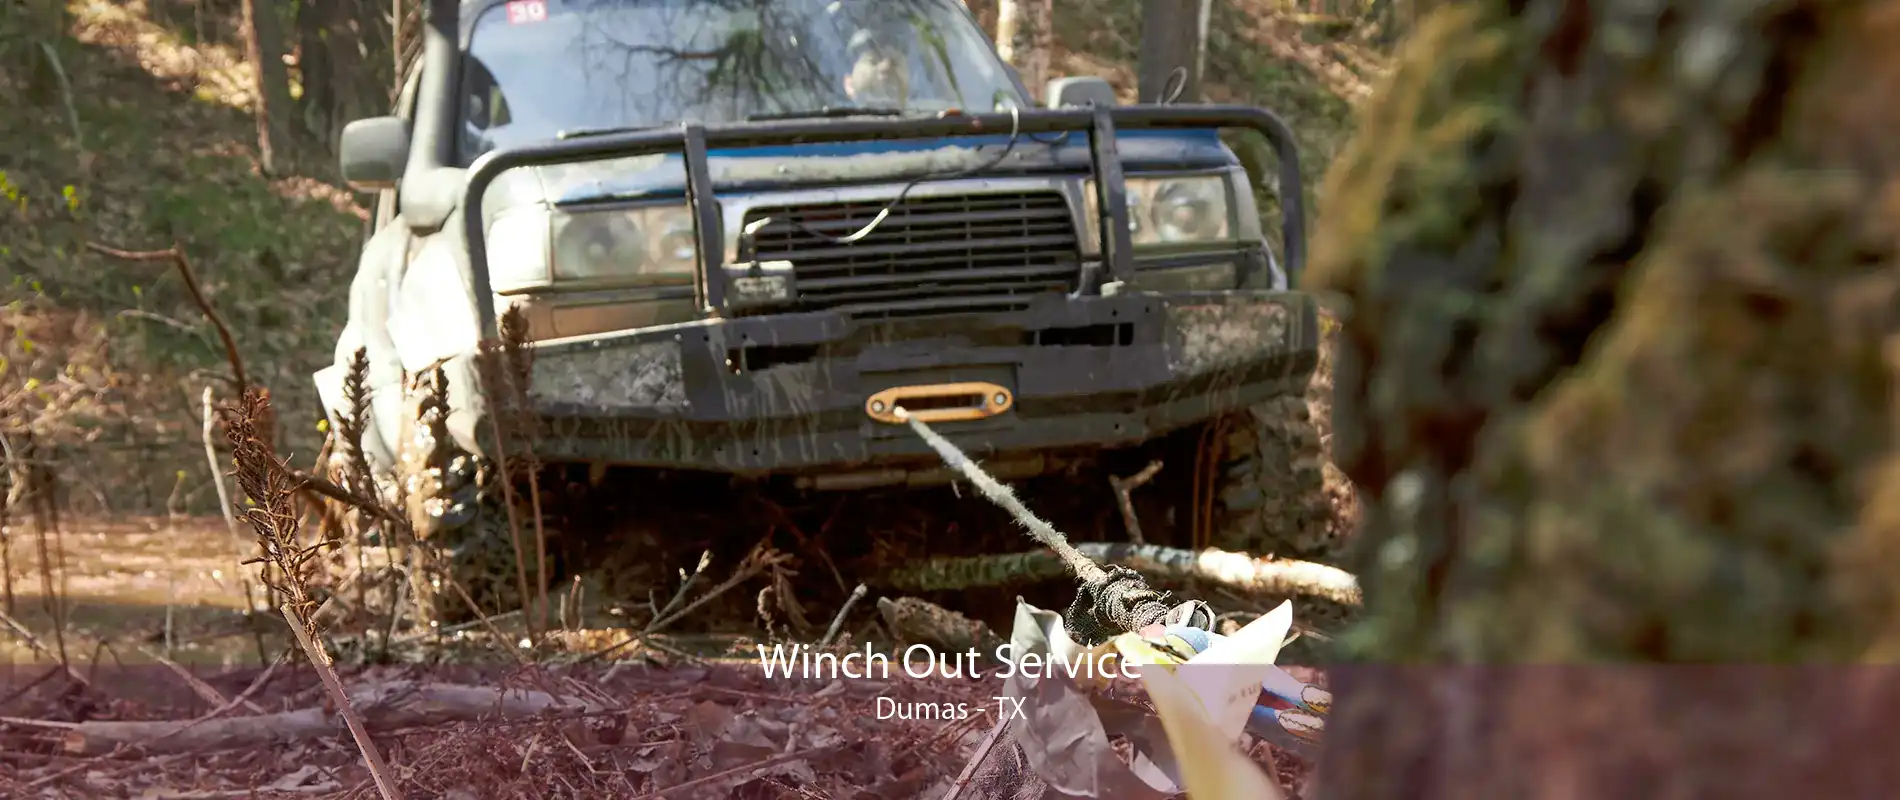 Winch Out Service Dumas - TX